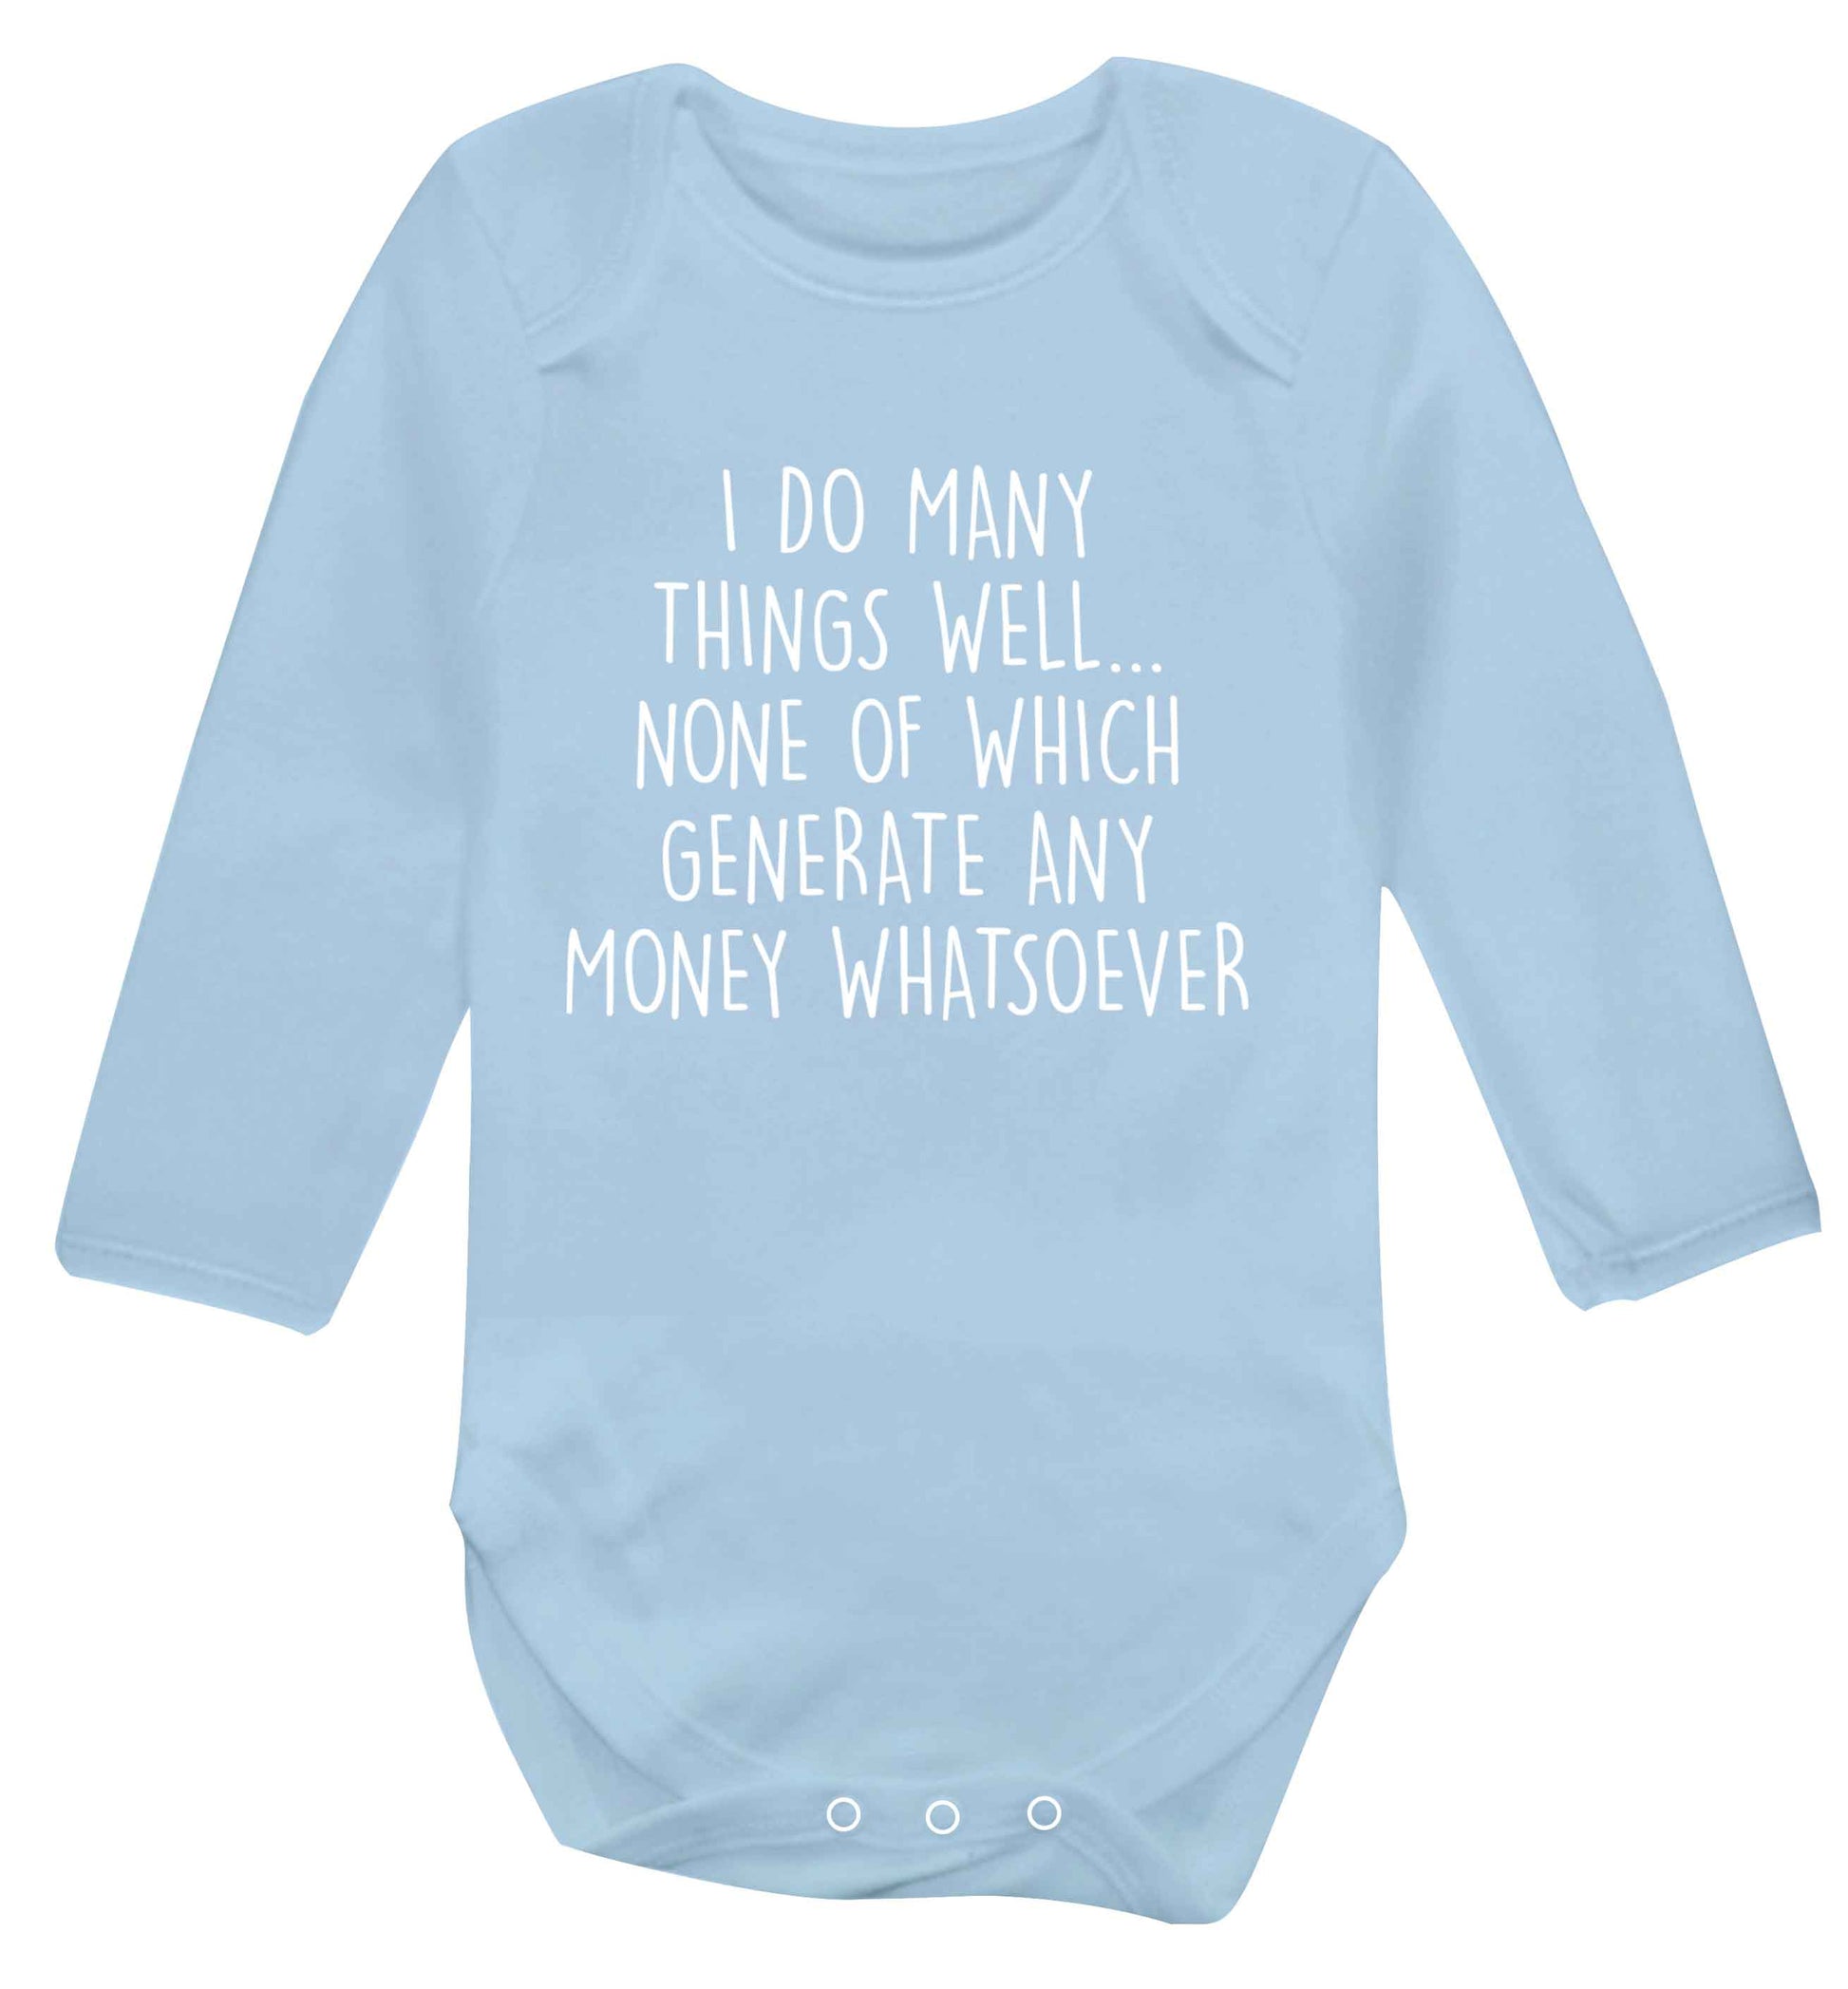 I do many things well none of which generate income Baby Vest long sleeved pale blue 6-12 months